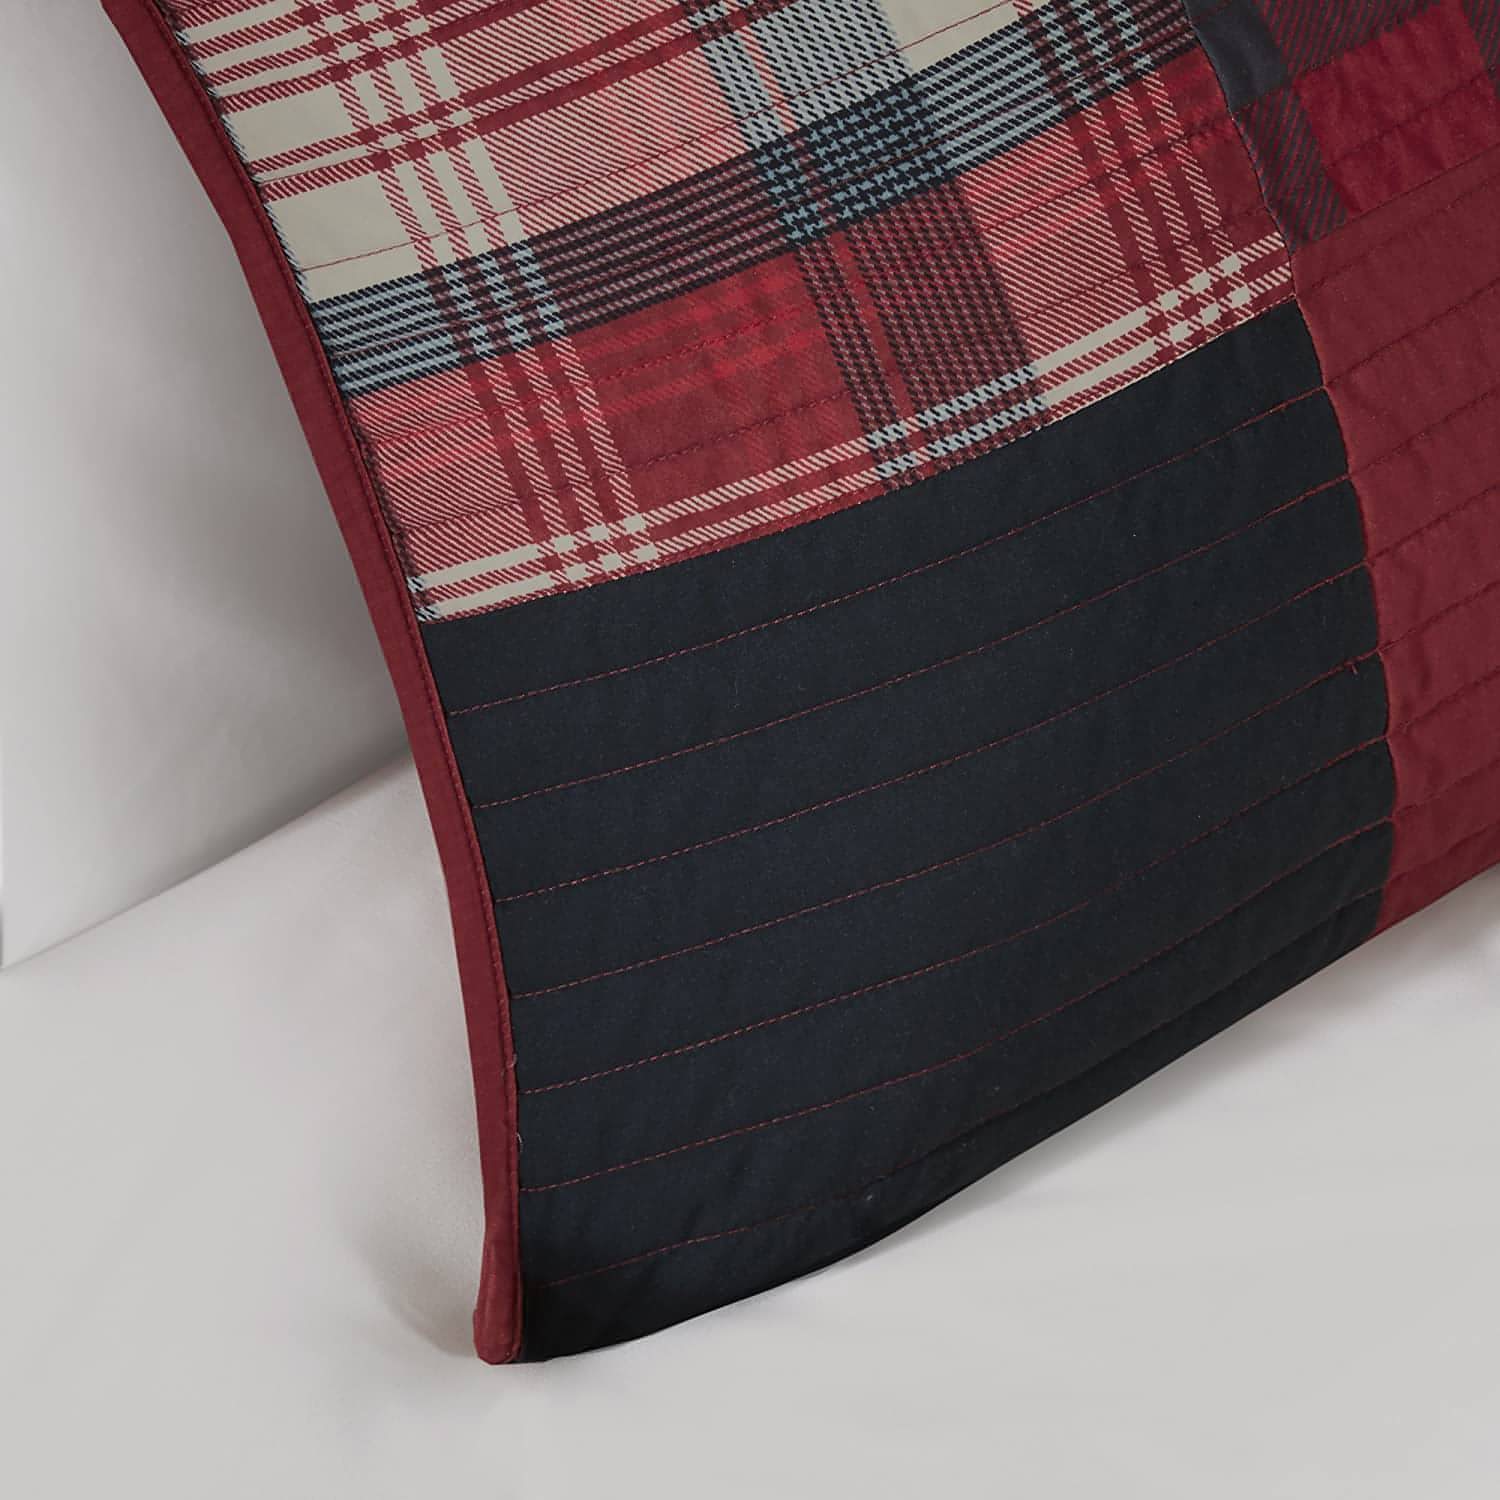 Woolrich-Woolrich 100% Cotton Quilt Reversible Cabin Lifestyle Design All Season, Breathable Coverlet Bedspread Bedding Set, Matching Shams, King/Cal King(110"x96"), Plaid Red, 3 Piece - Brandat Outlet